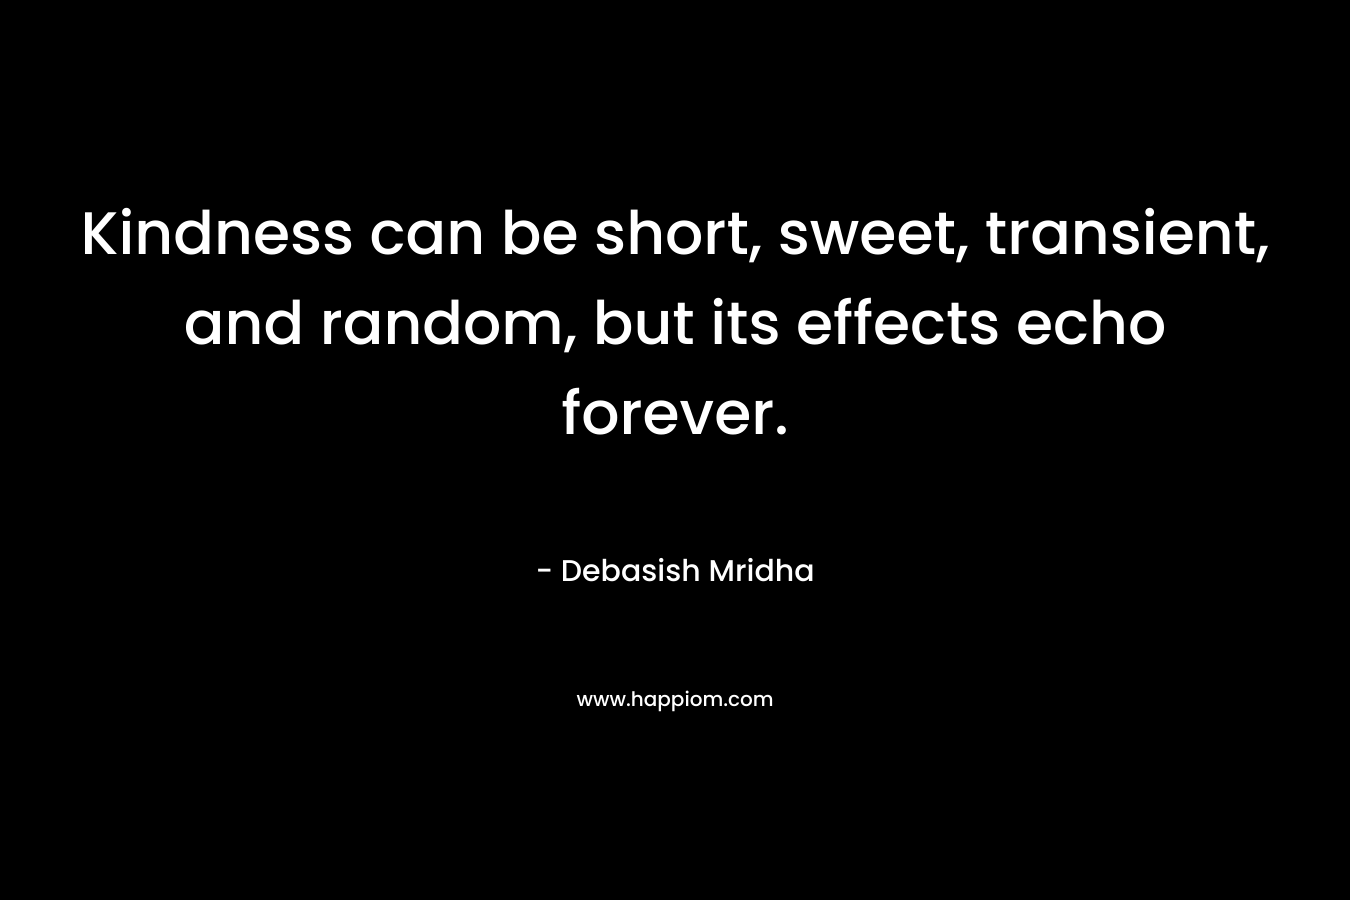 Kindness can be short, sweet, transient, and random, but its effects echo forever. – Debasish Mridha